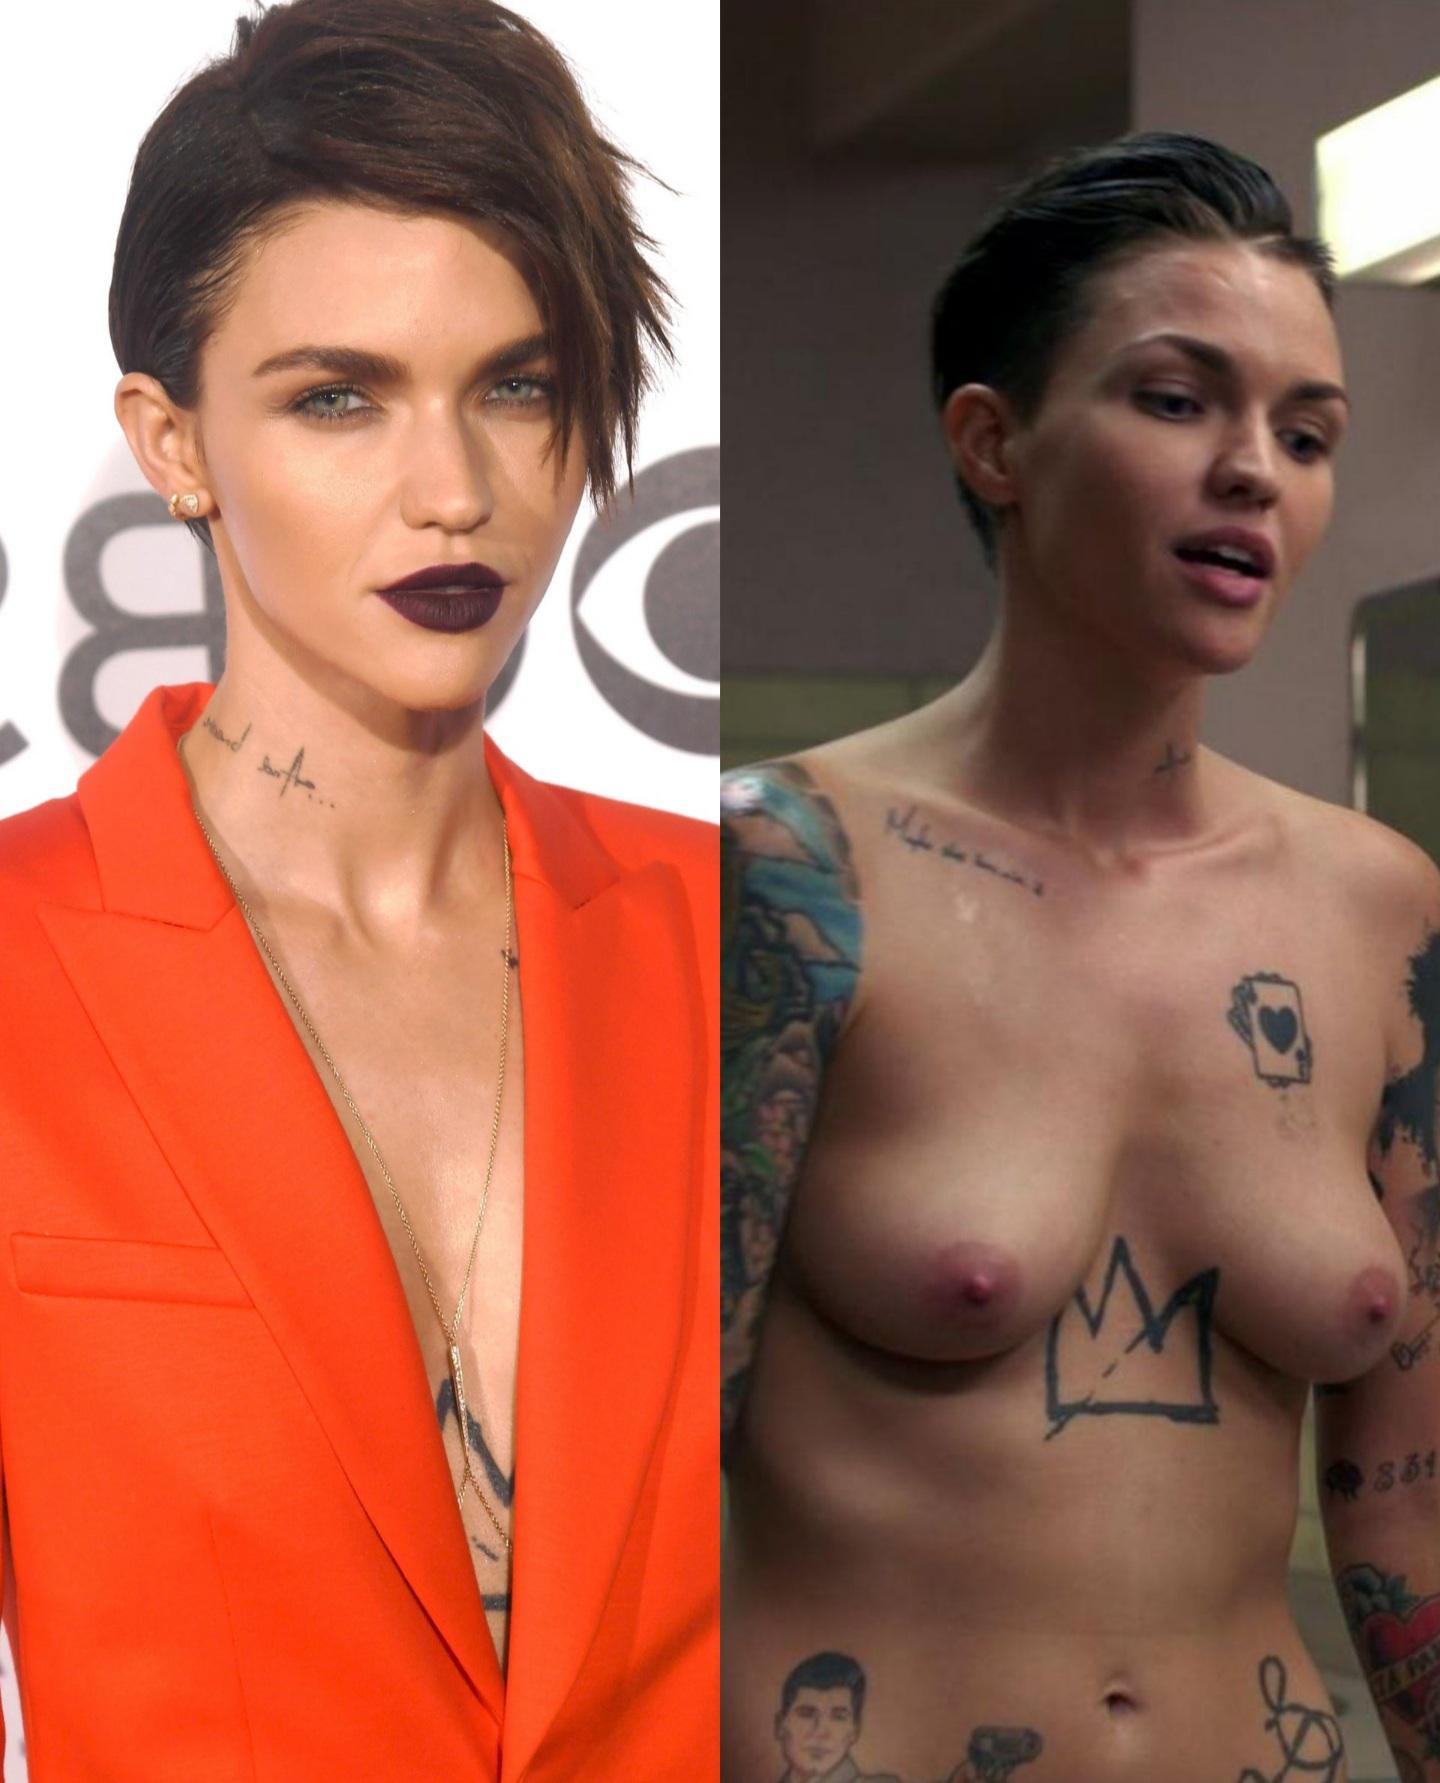 Ruby rose leaked